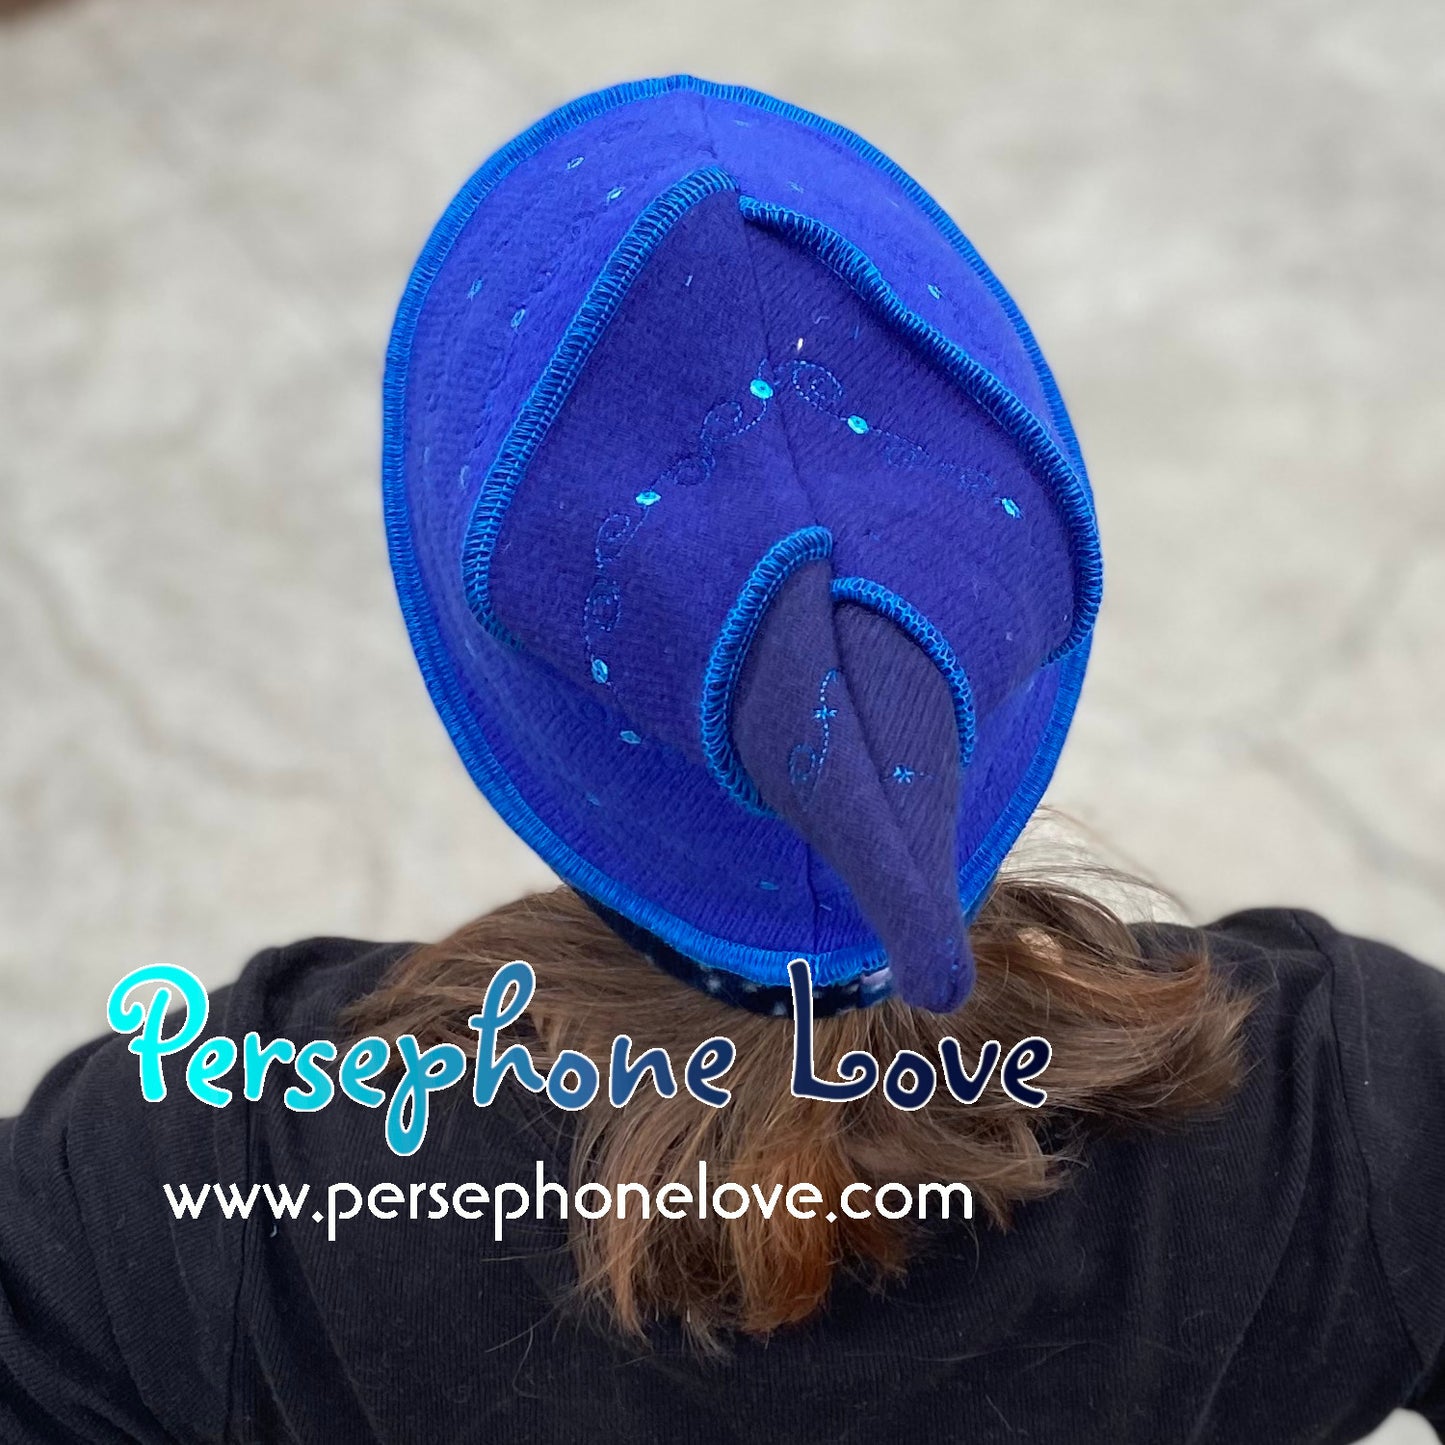 Katwise inspired blue felted embroidered galaxy pixie elf hat with sequins-1387